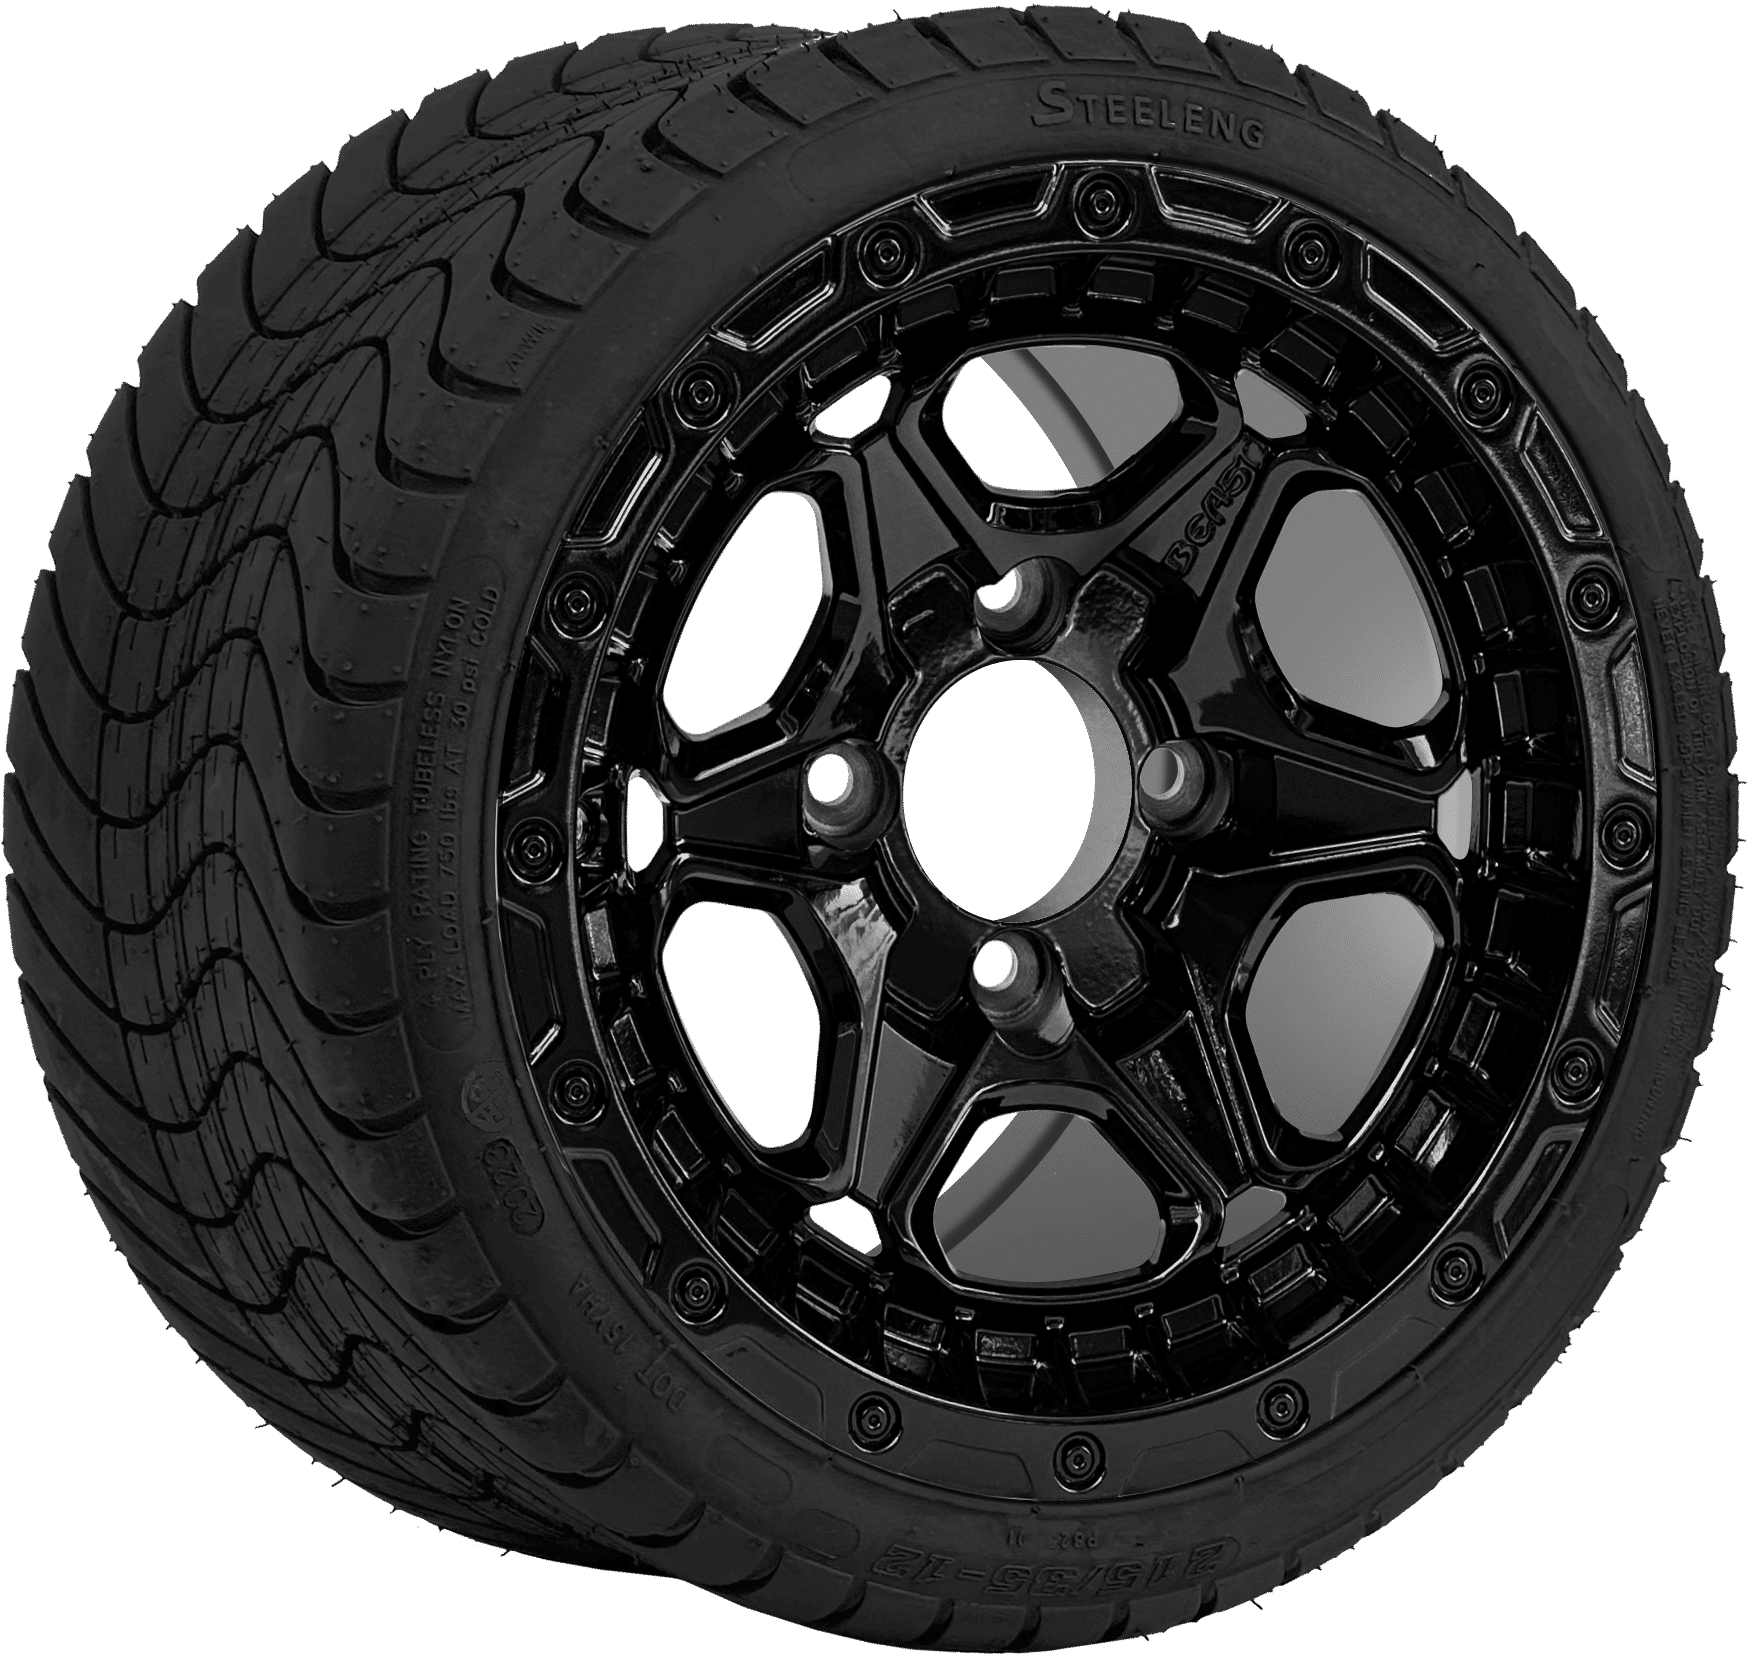 BNDL-TR1212-WH1264-CC0027-LN0002 12″ GRIZZLY GLOSSY BLACK WHEEL – ALUMINUM ALLOY / STEELENG 215/35-12 LOW PROFILE TIRE